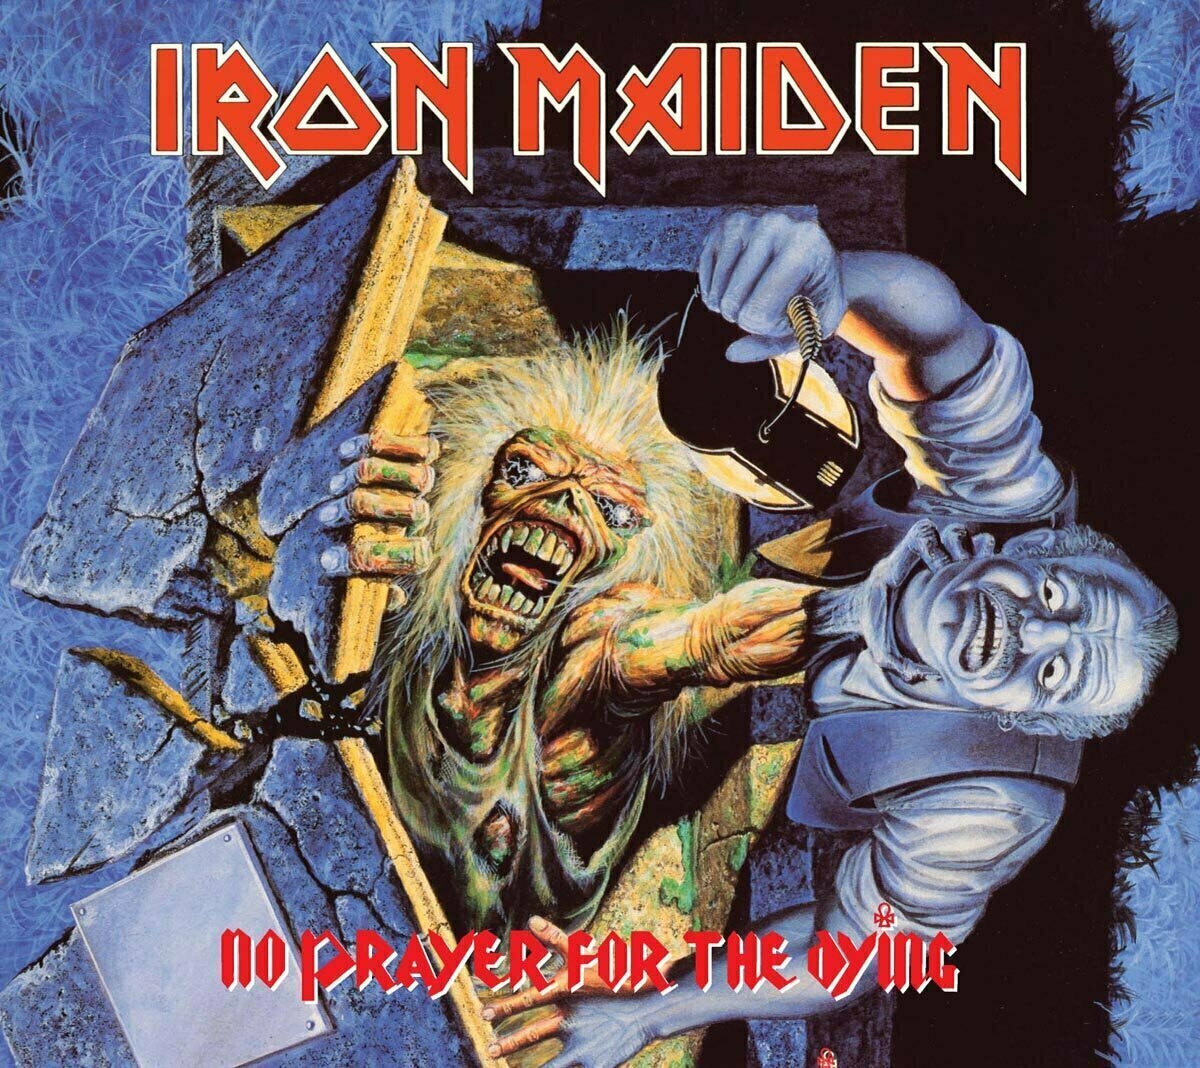 Iron Maiden - No Prayer For The Dying (1CD) 2019 Digipack Аудио диск